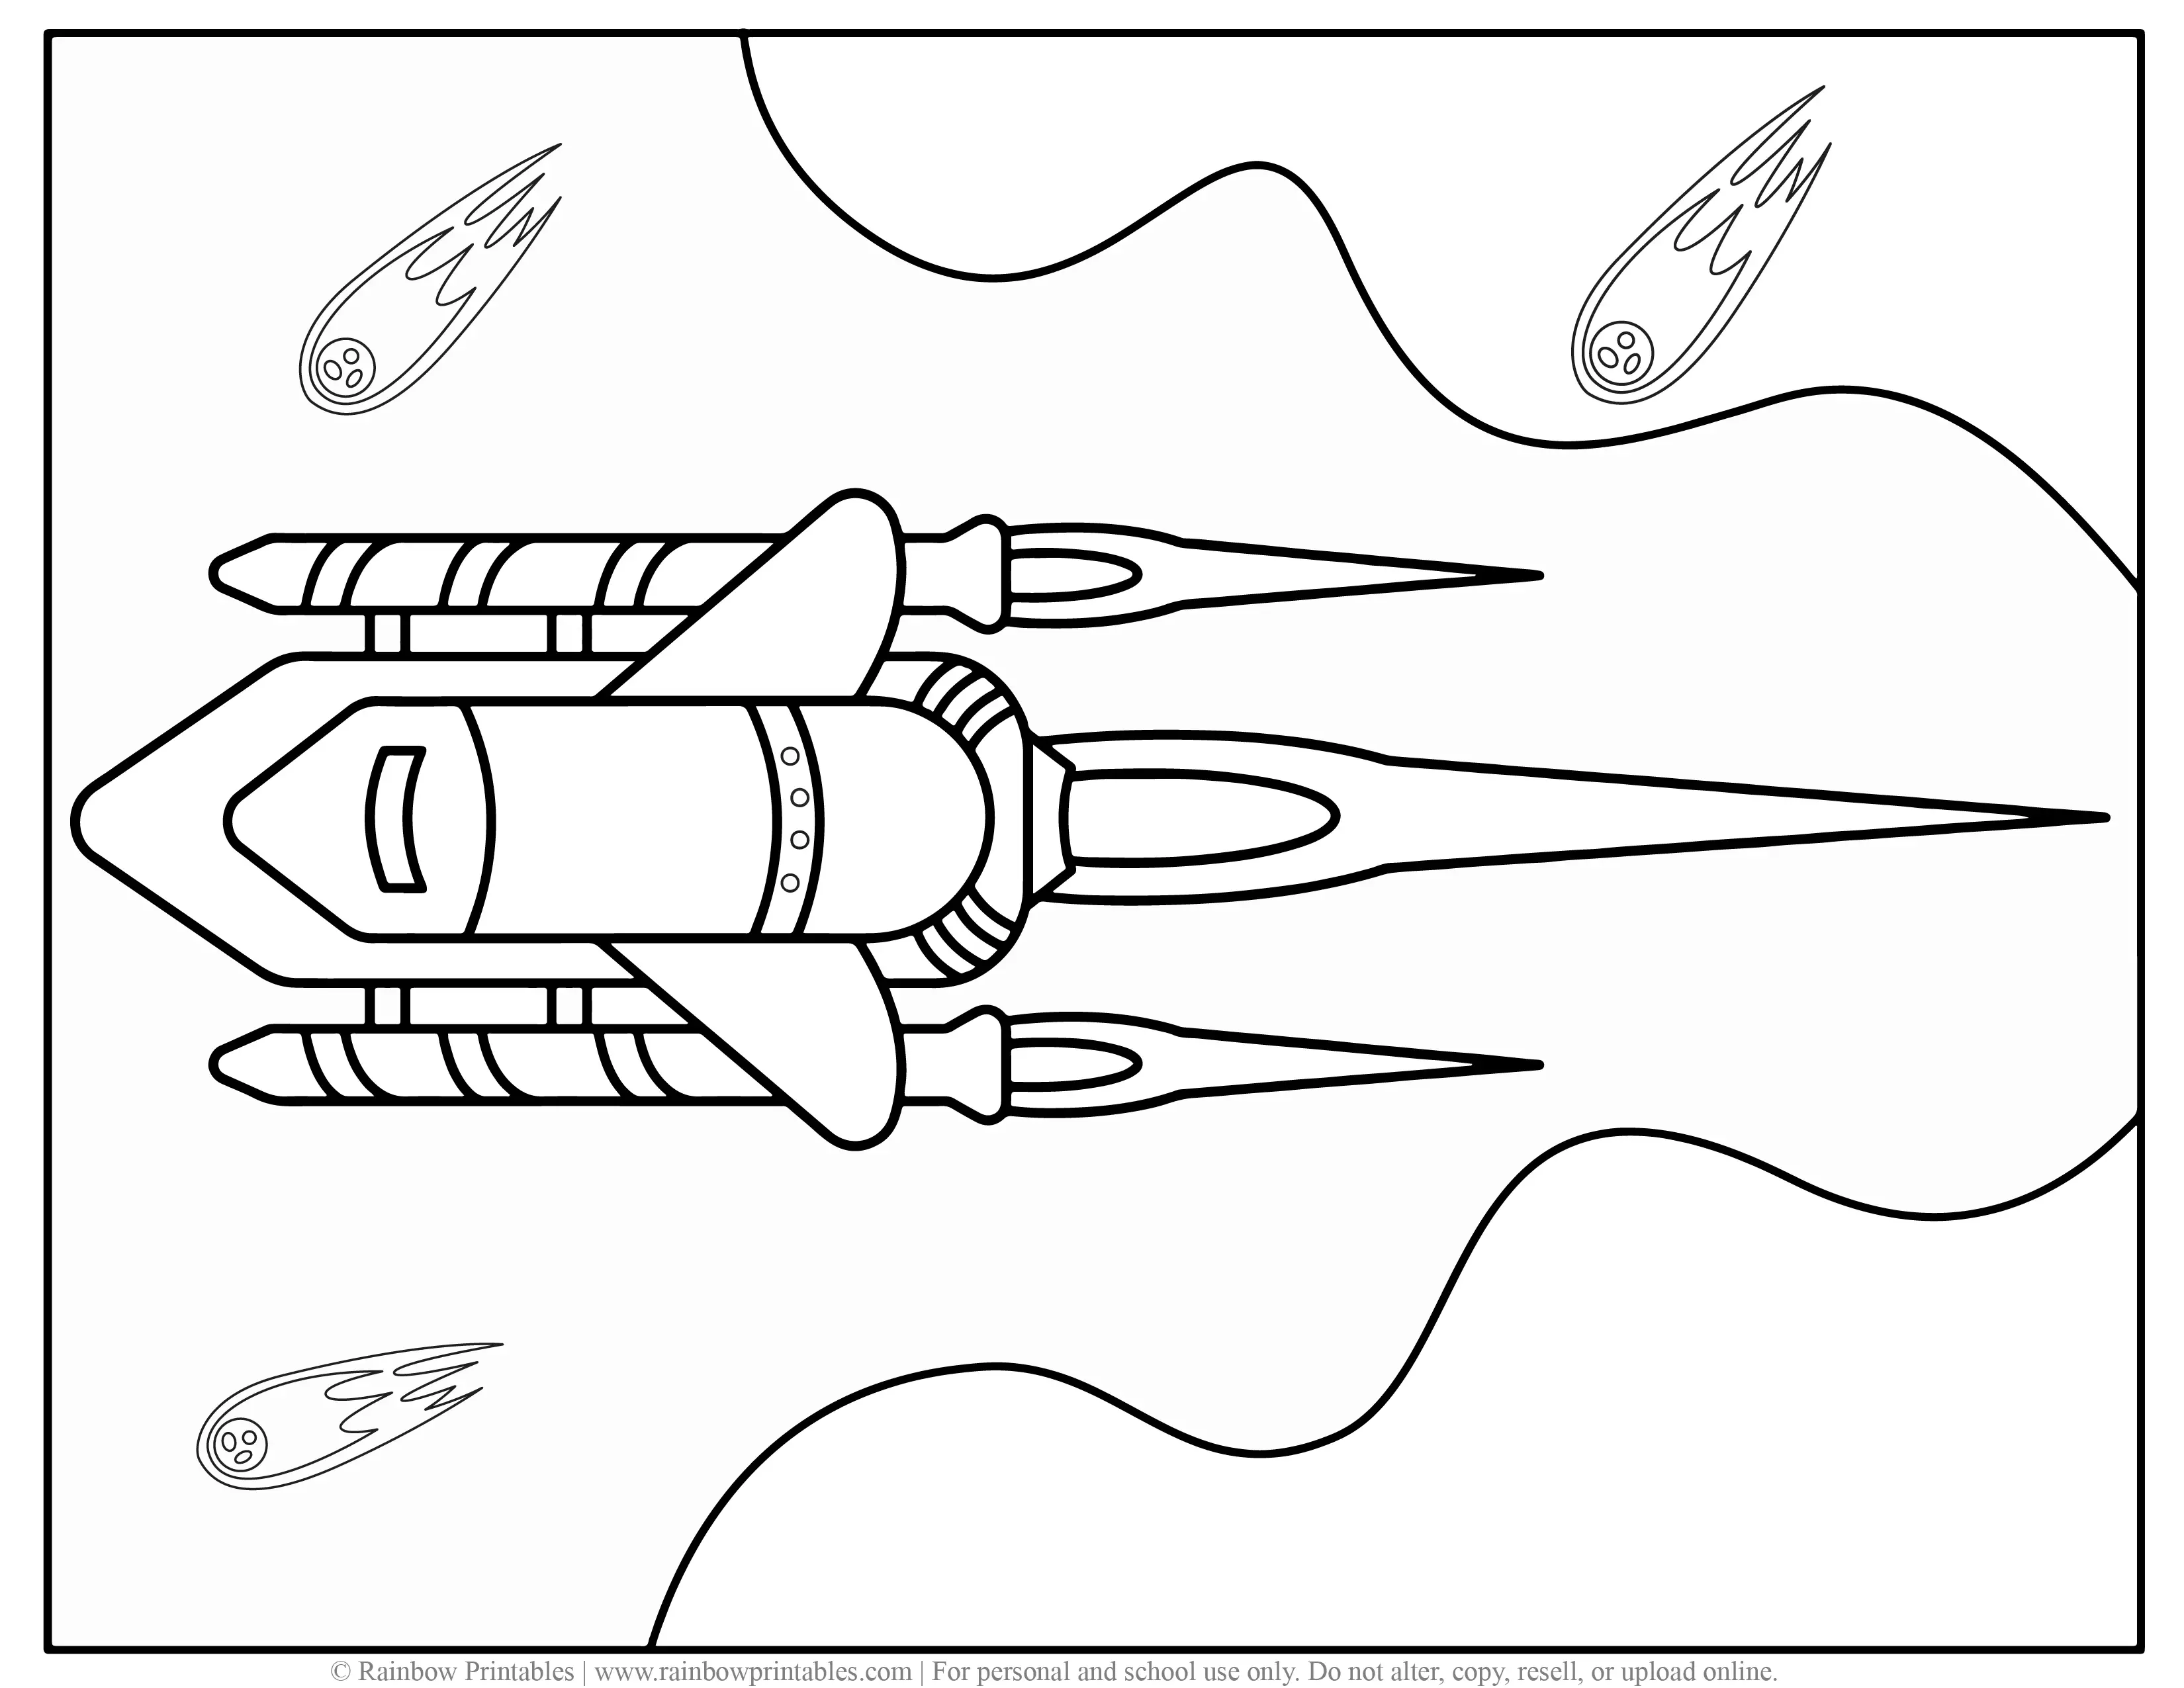 Rocketship Space Meteor Launch Rocket Coloring Page for Kids